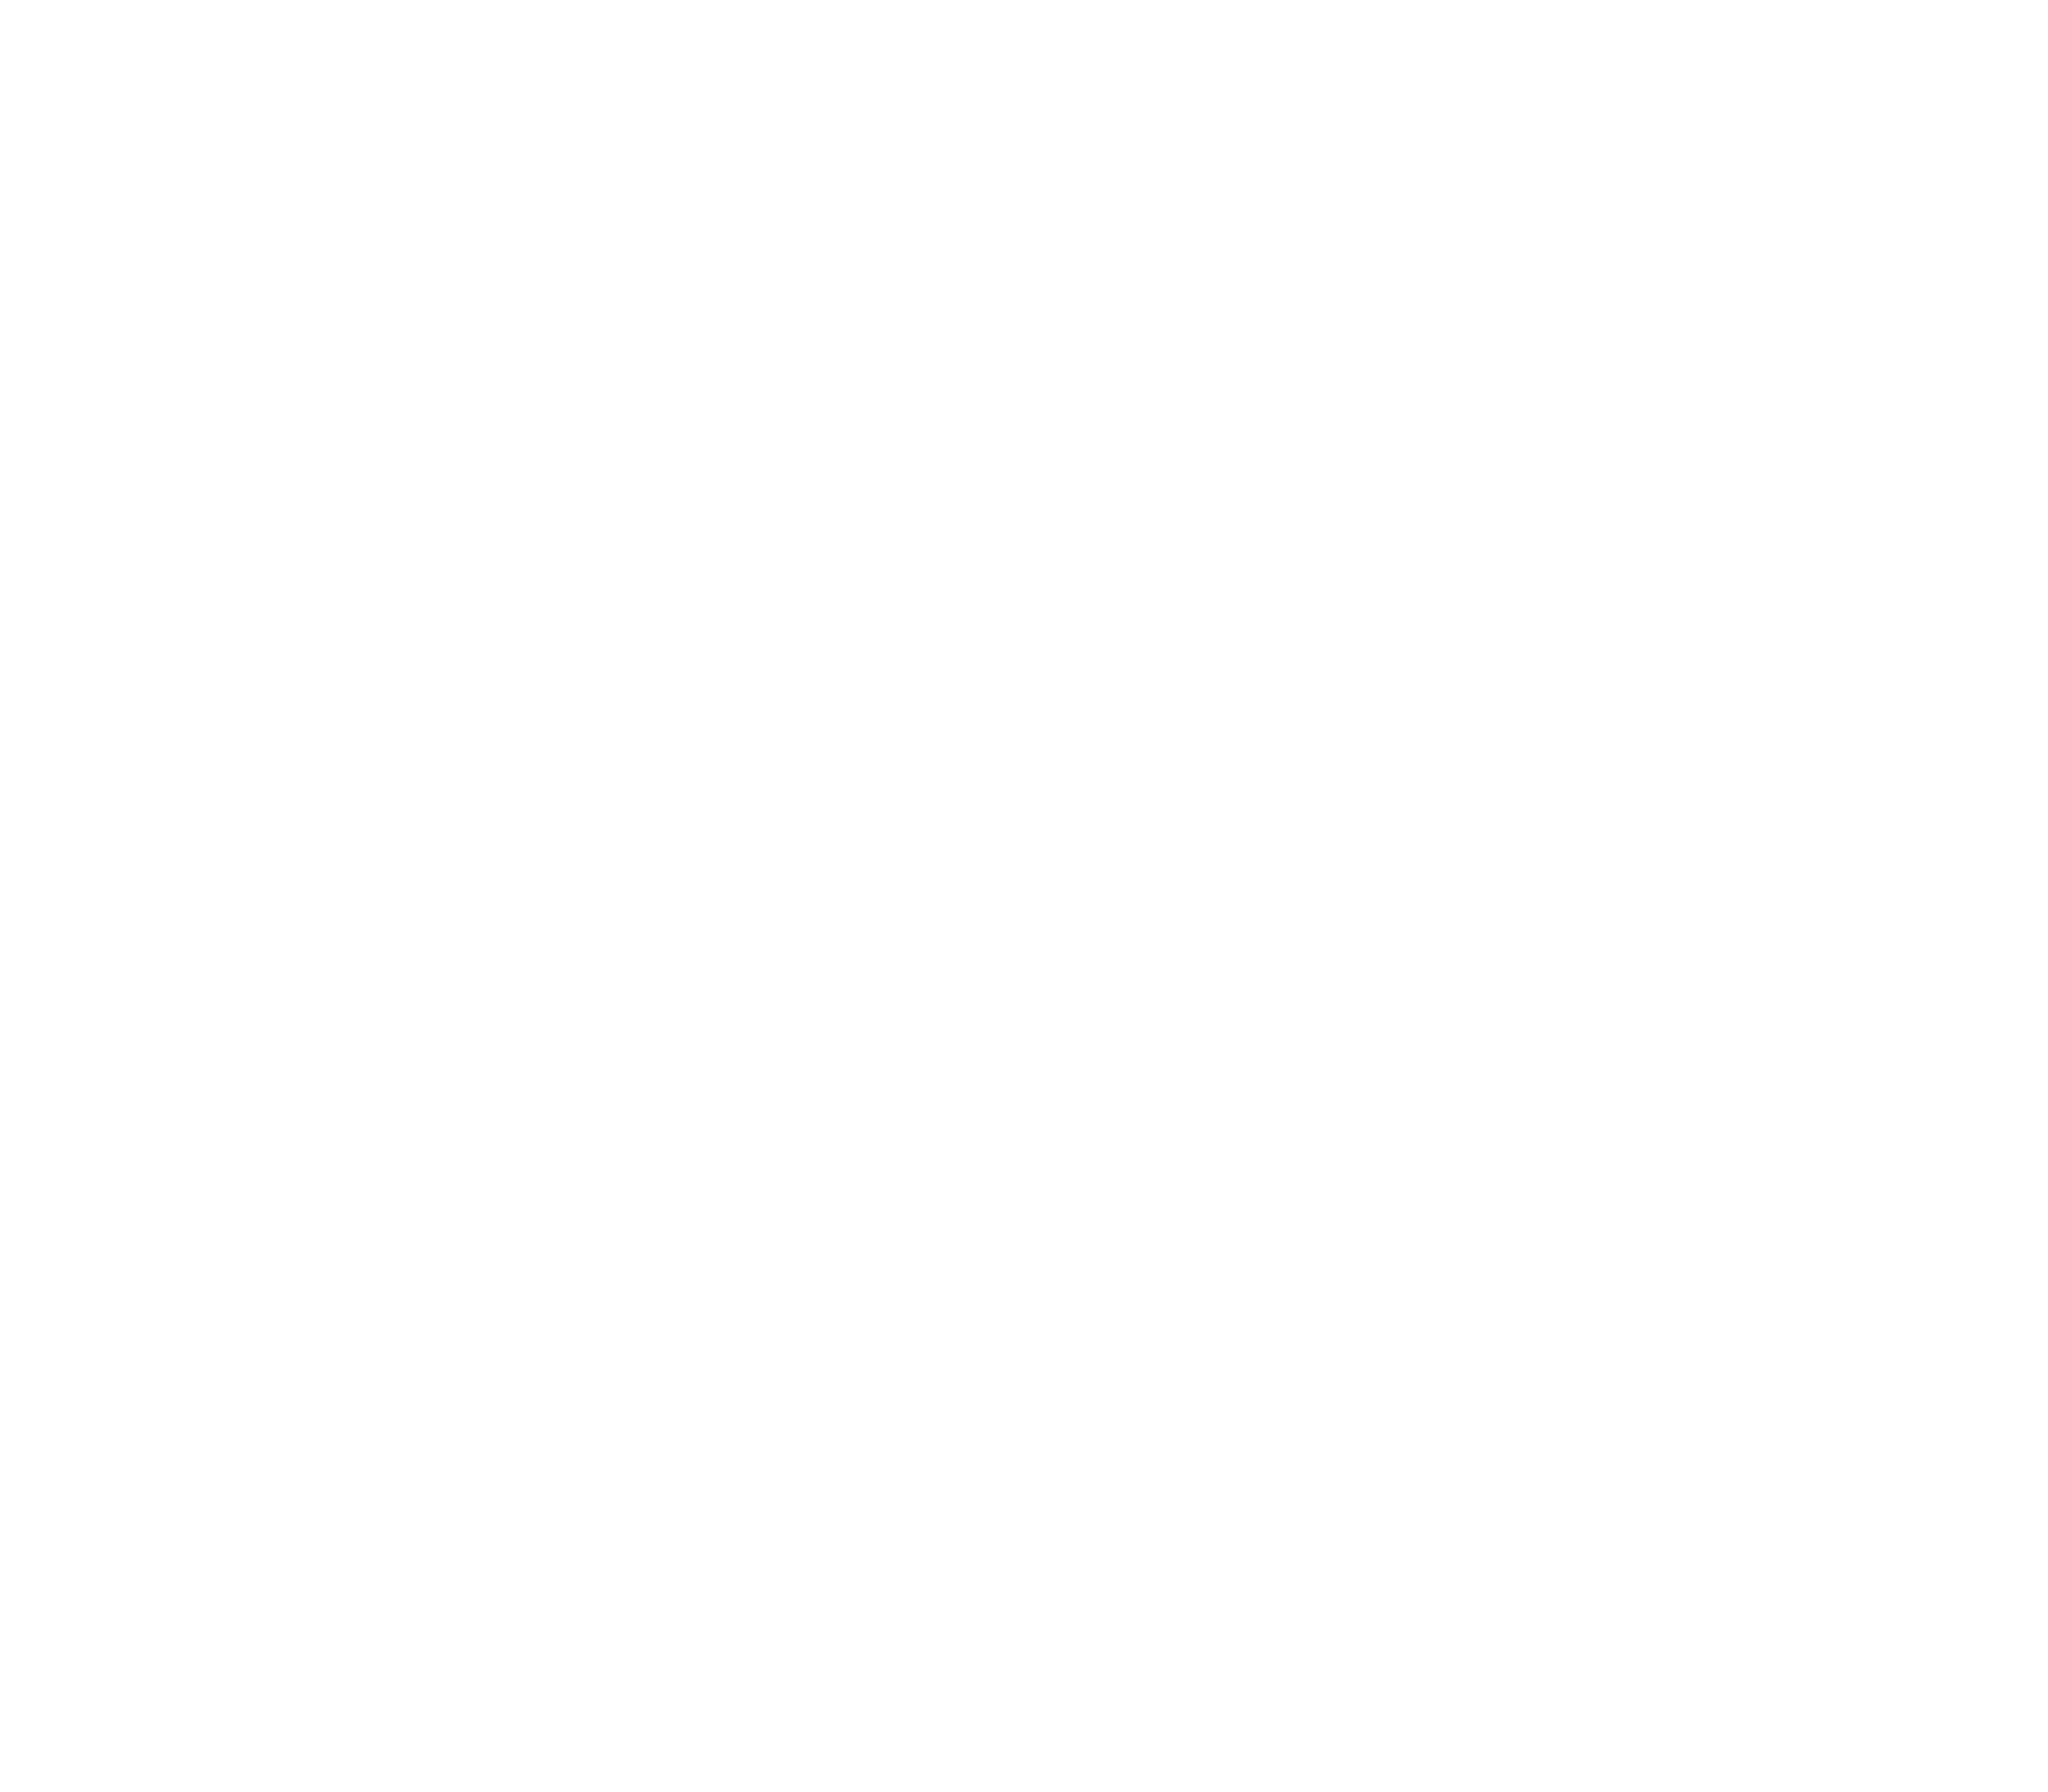 folder icon with magnifying glass